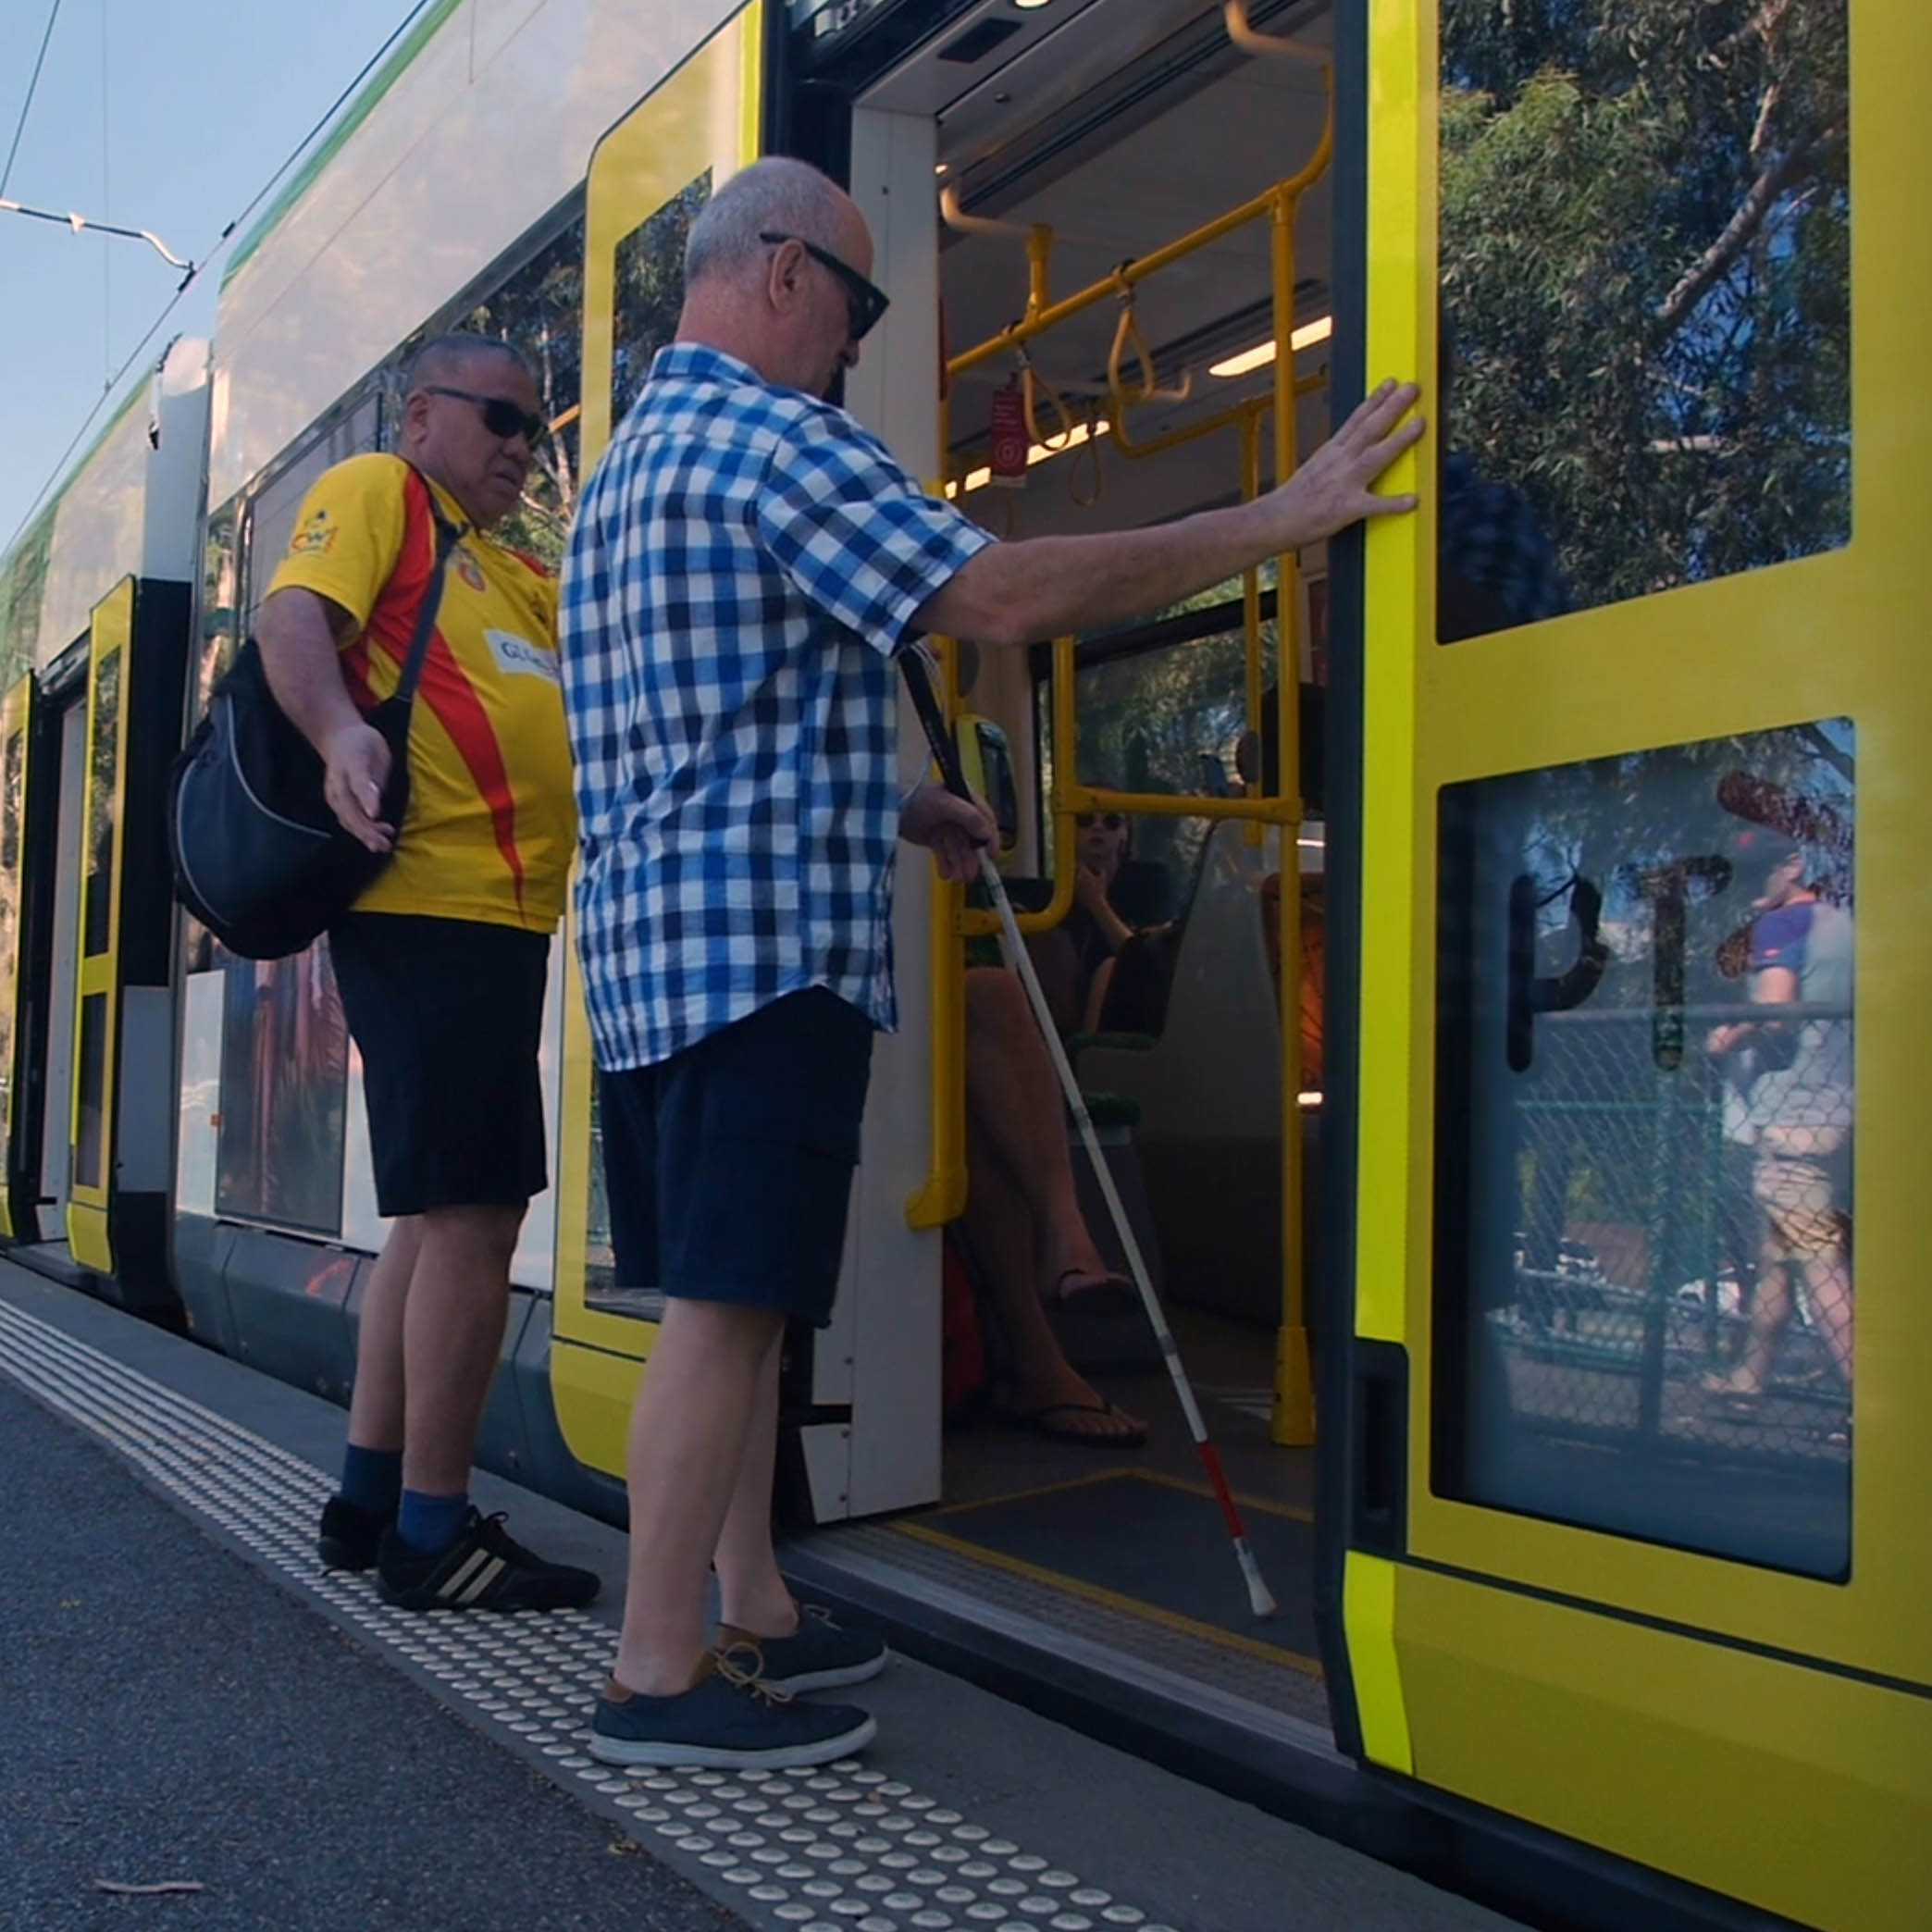 Image shows a white cane user boarding a tram. He is a Caucasian man and is wearing dark blue shorts and a blue and white checked shirt.